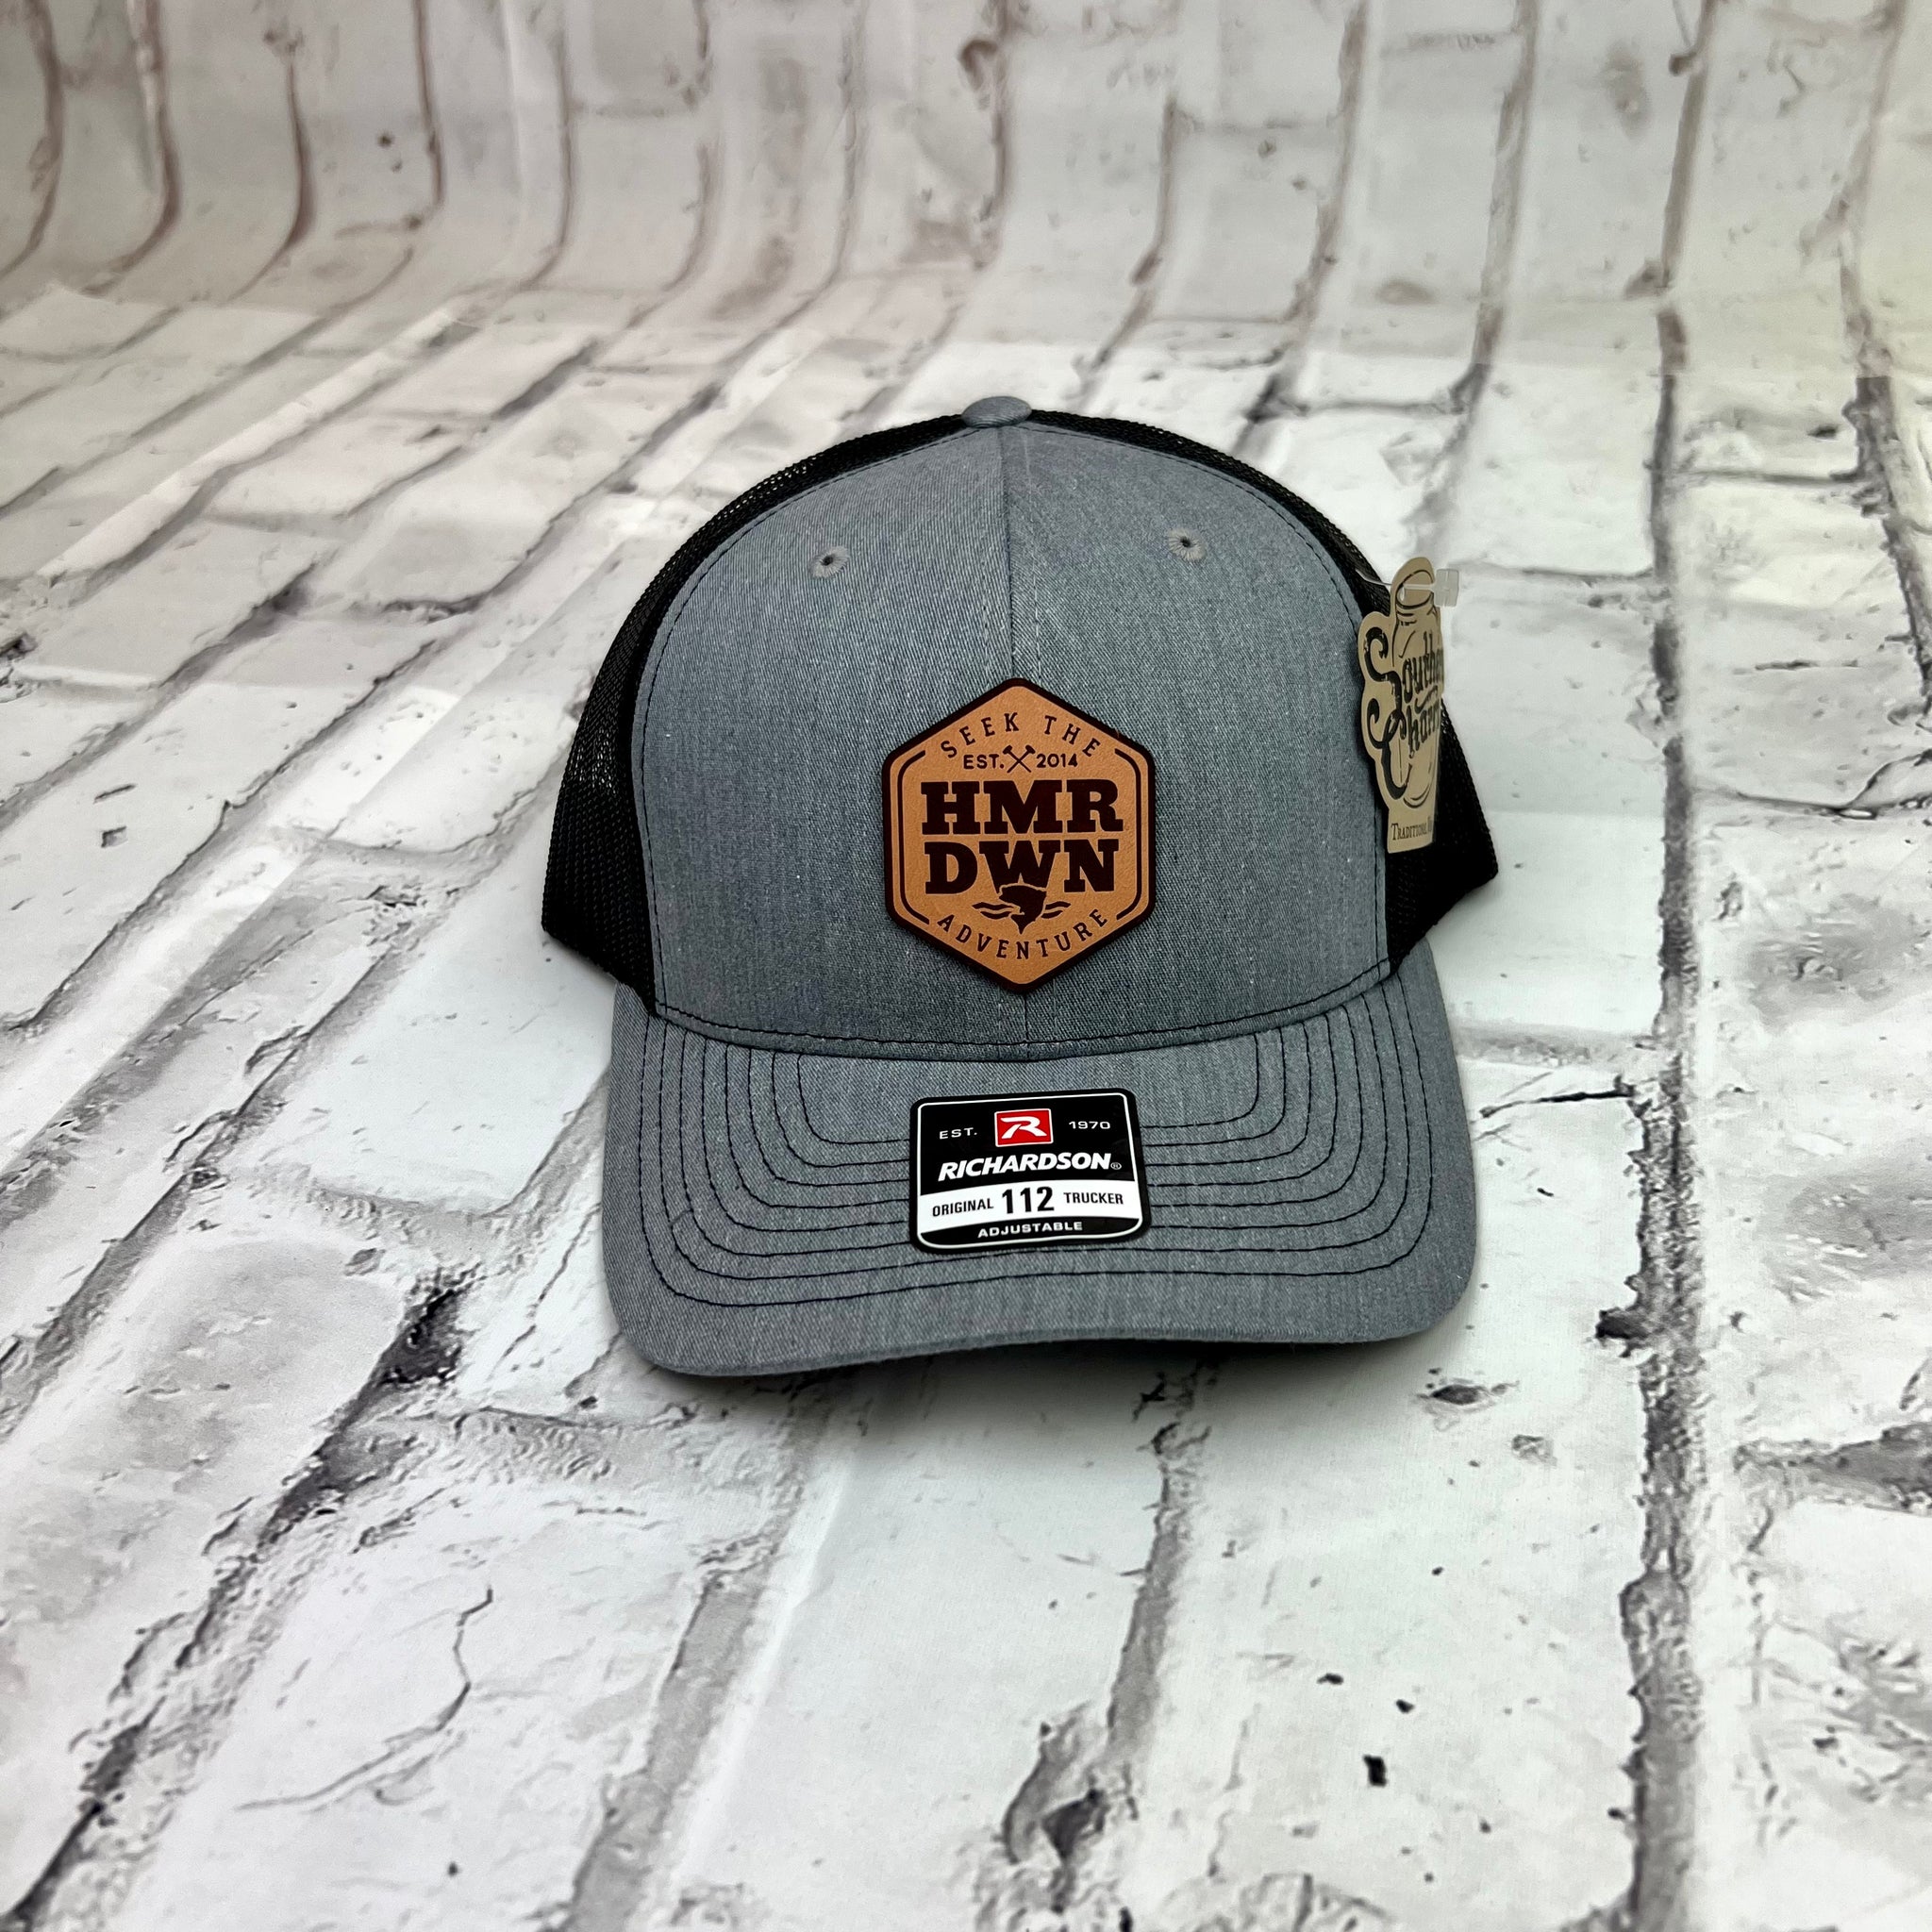 Hammer Down "Bass Light" Hat - Charcoal/Black with Leather Patch